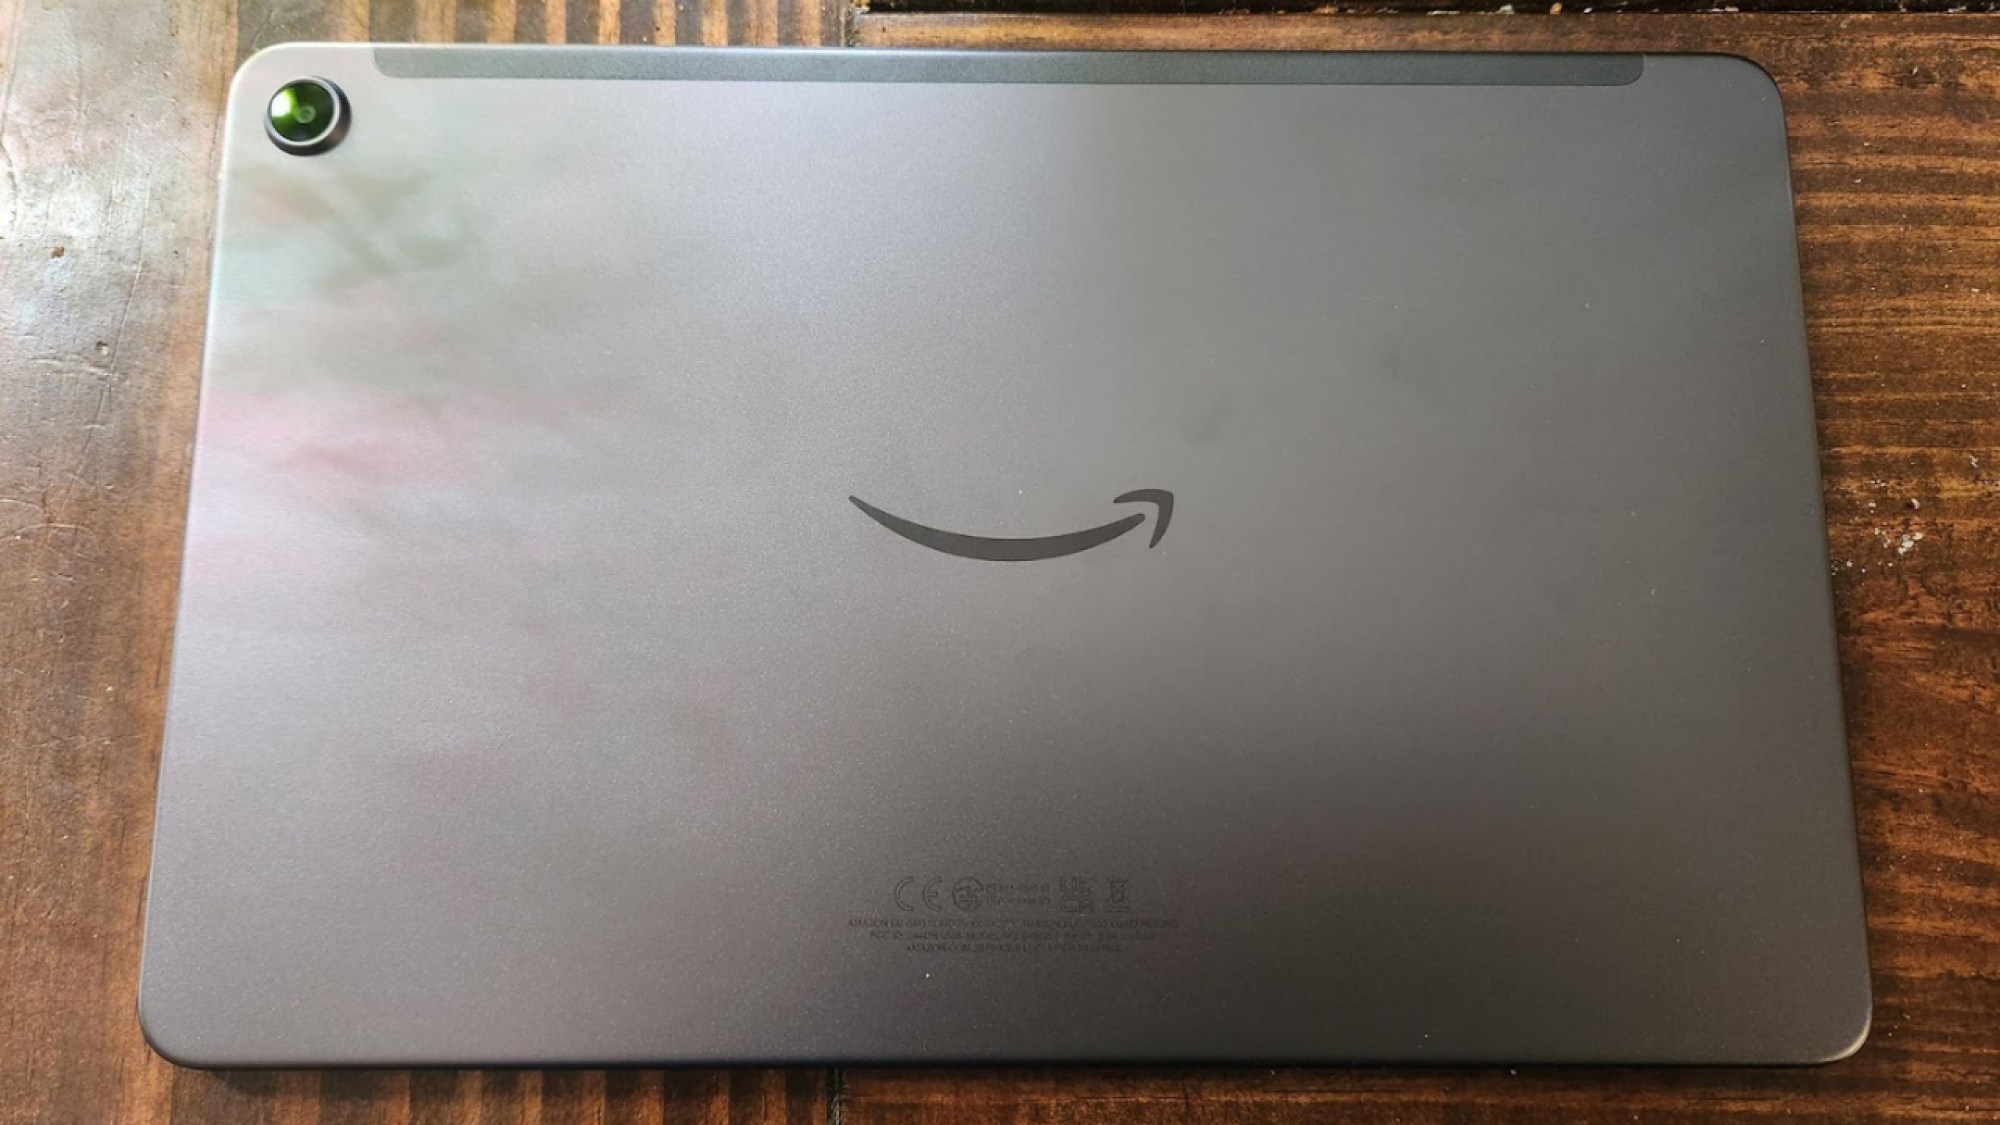 back of amazon tablet with camera lens and amazon smile logo